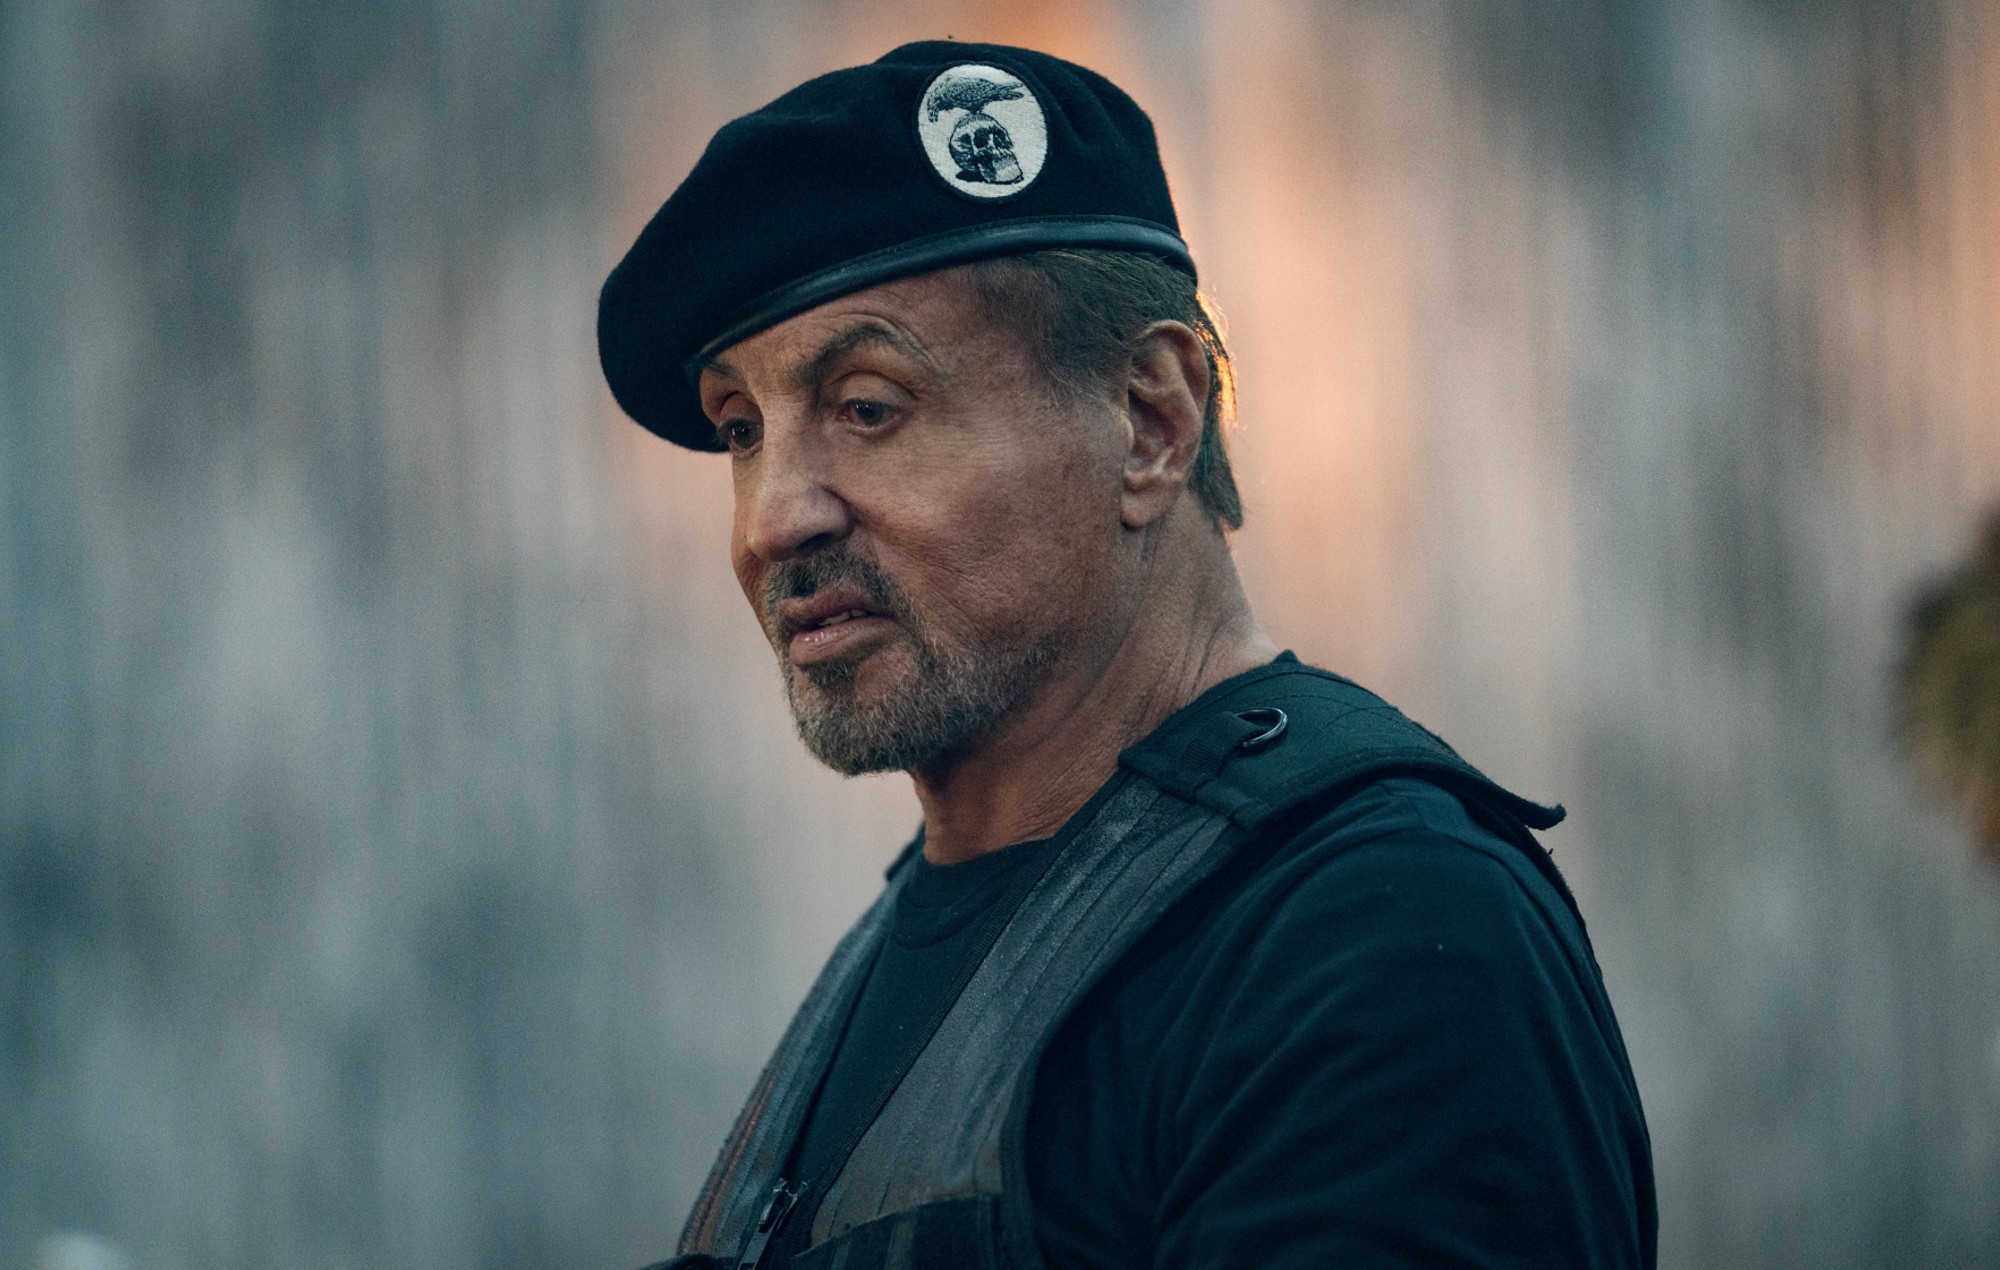 Here’s every song on ‘The Expendables 4’ soundtrack